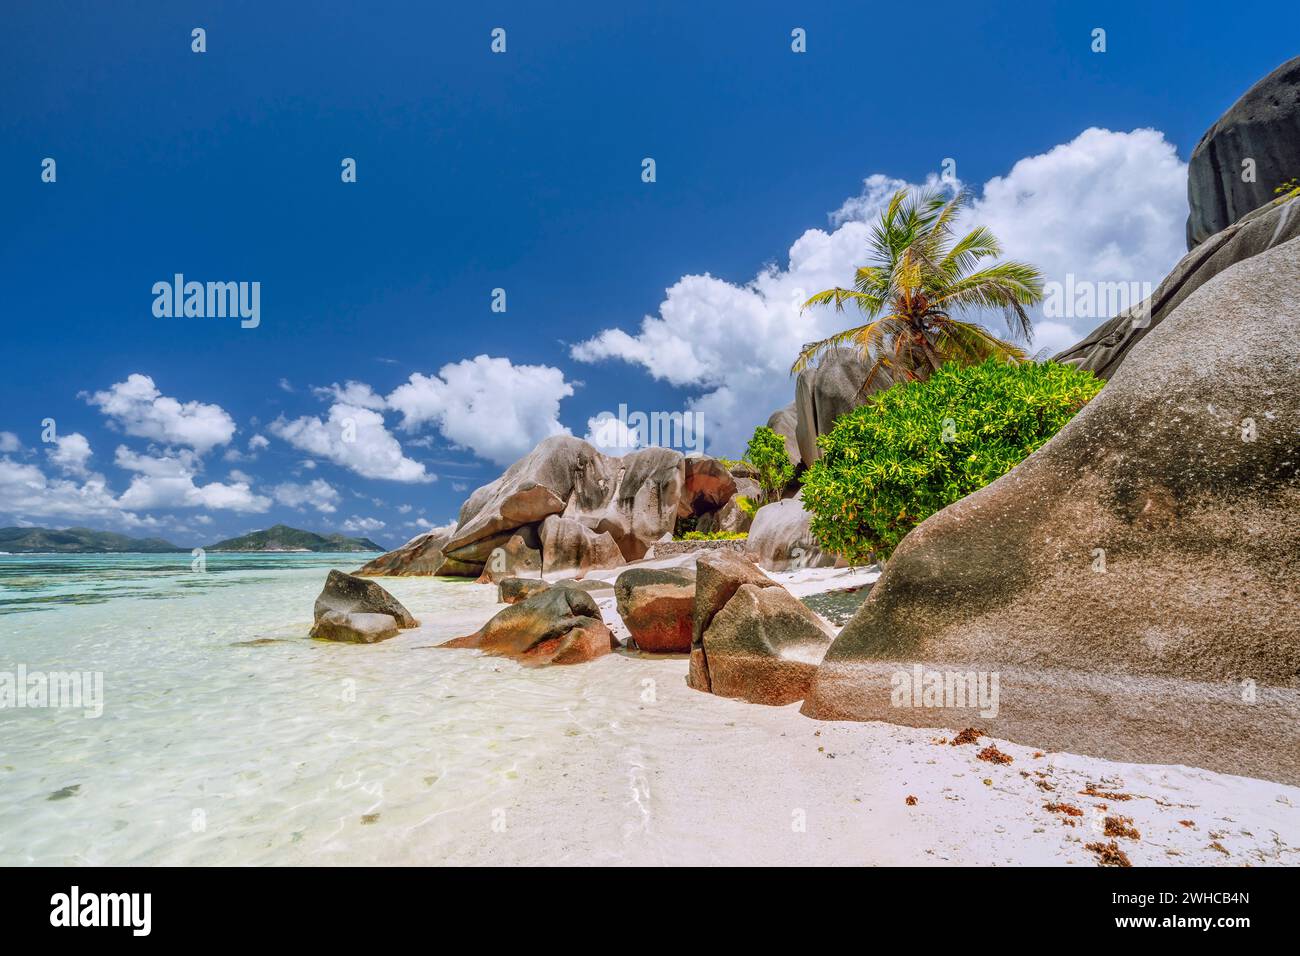 Anse Source d'Argent. Paradise exotic beach on island La Digue in Seychelles. Stock Photo